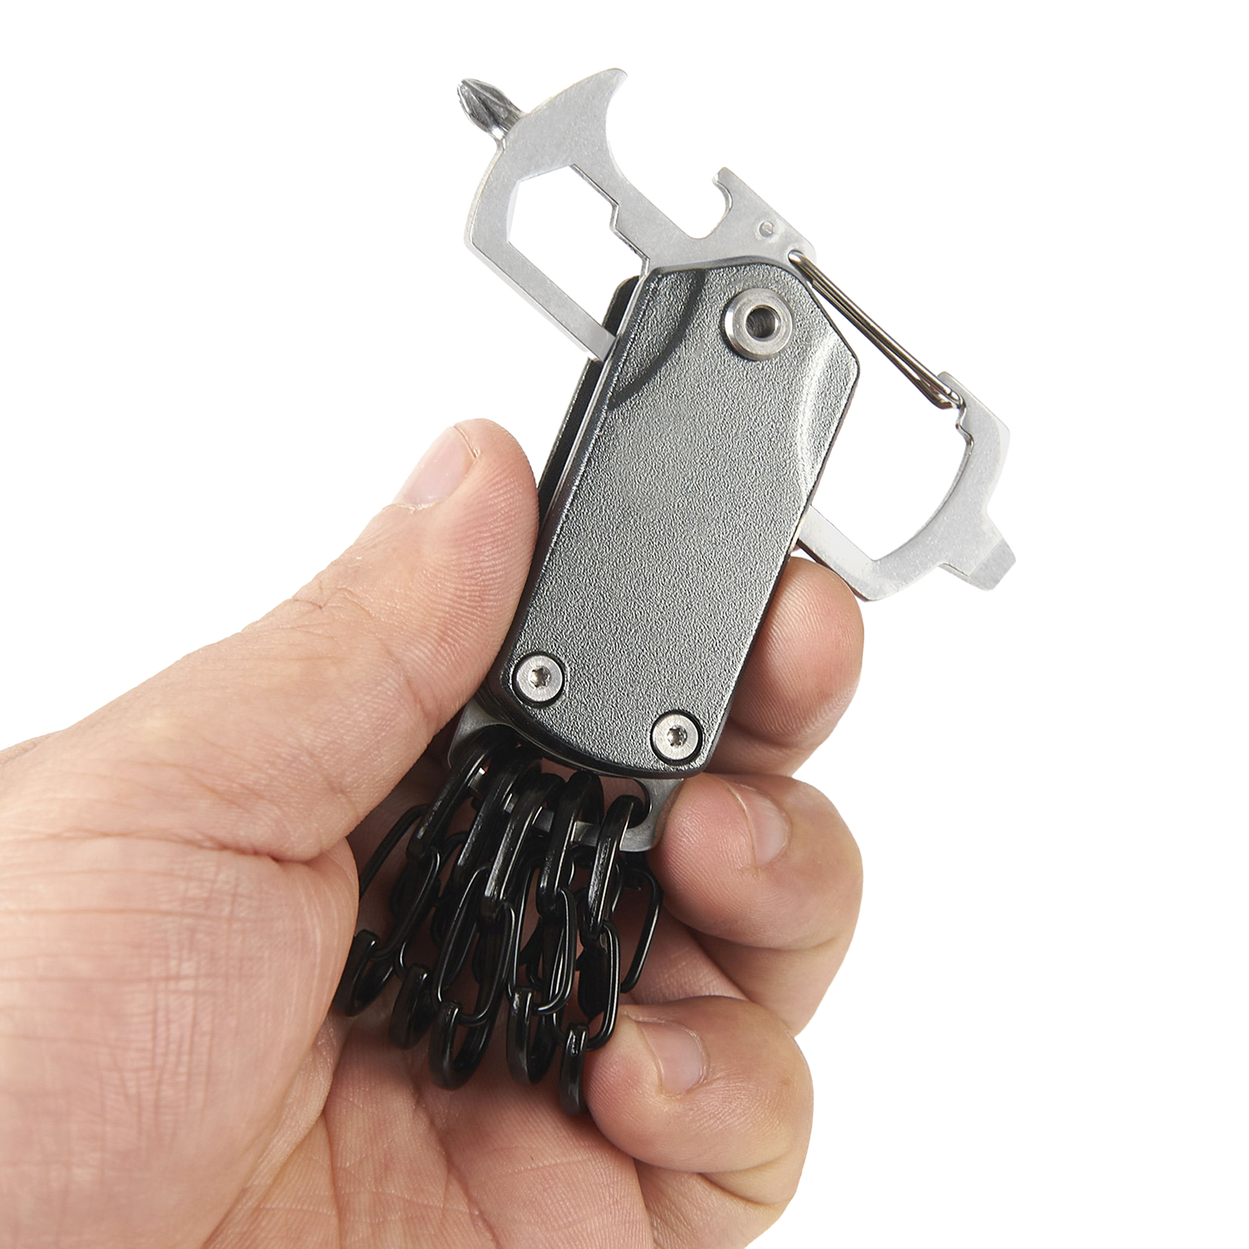 Flip Out Keyring Multifunction tool Portable, DIY projects, camping, hiking. Great for keychain organization; fits on keyring, carabiner, wallet. Features: 3 wrenches, bottle opener, Phillips and flathead screwdrivers and 6 clip on carabiner accessory. Great gift idea for men, glamping, excellent stocking stuffer!